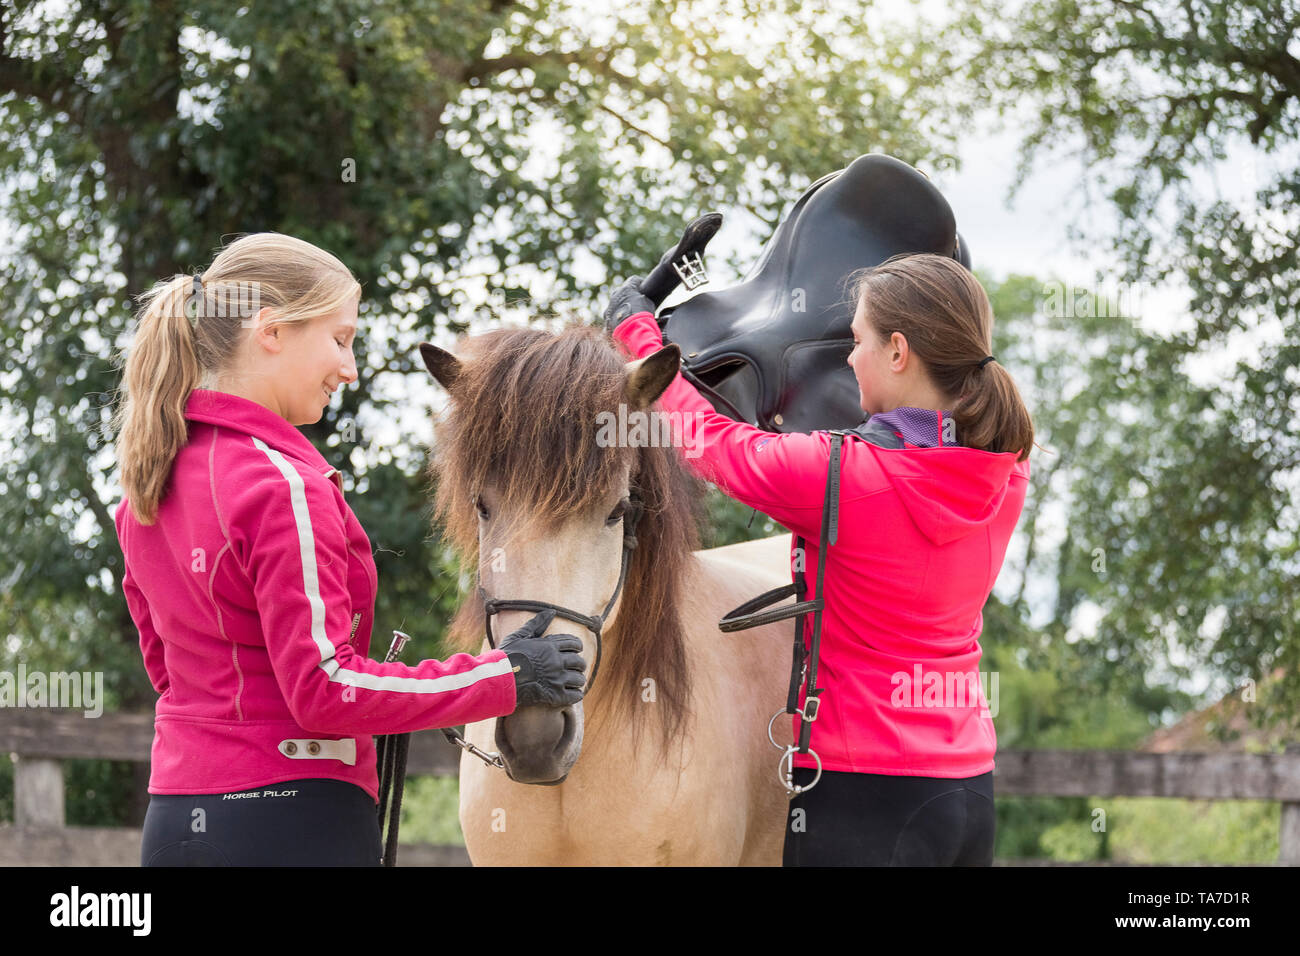 Icelandic Horse. Juvenile dun horse being trained to accept a saddle. Austria Stock Photo